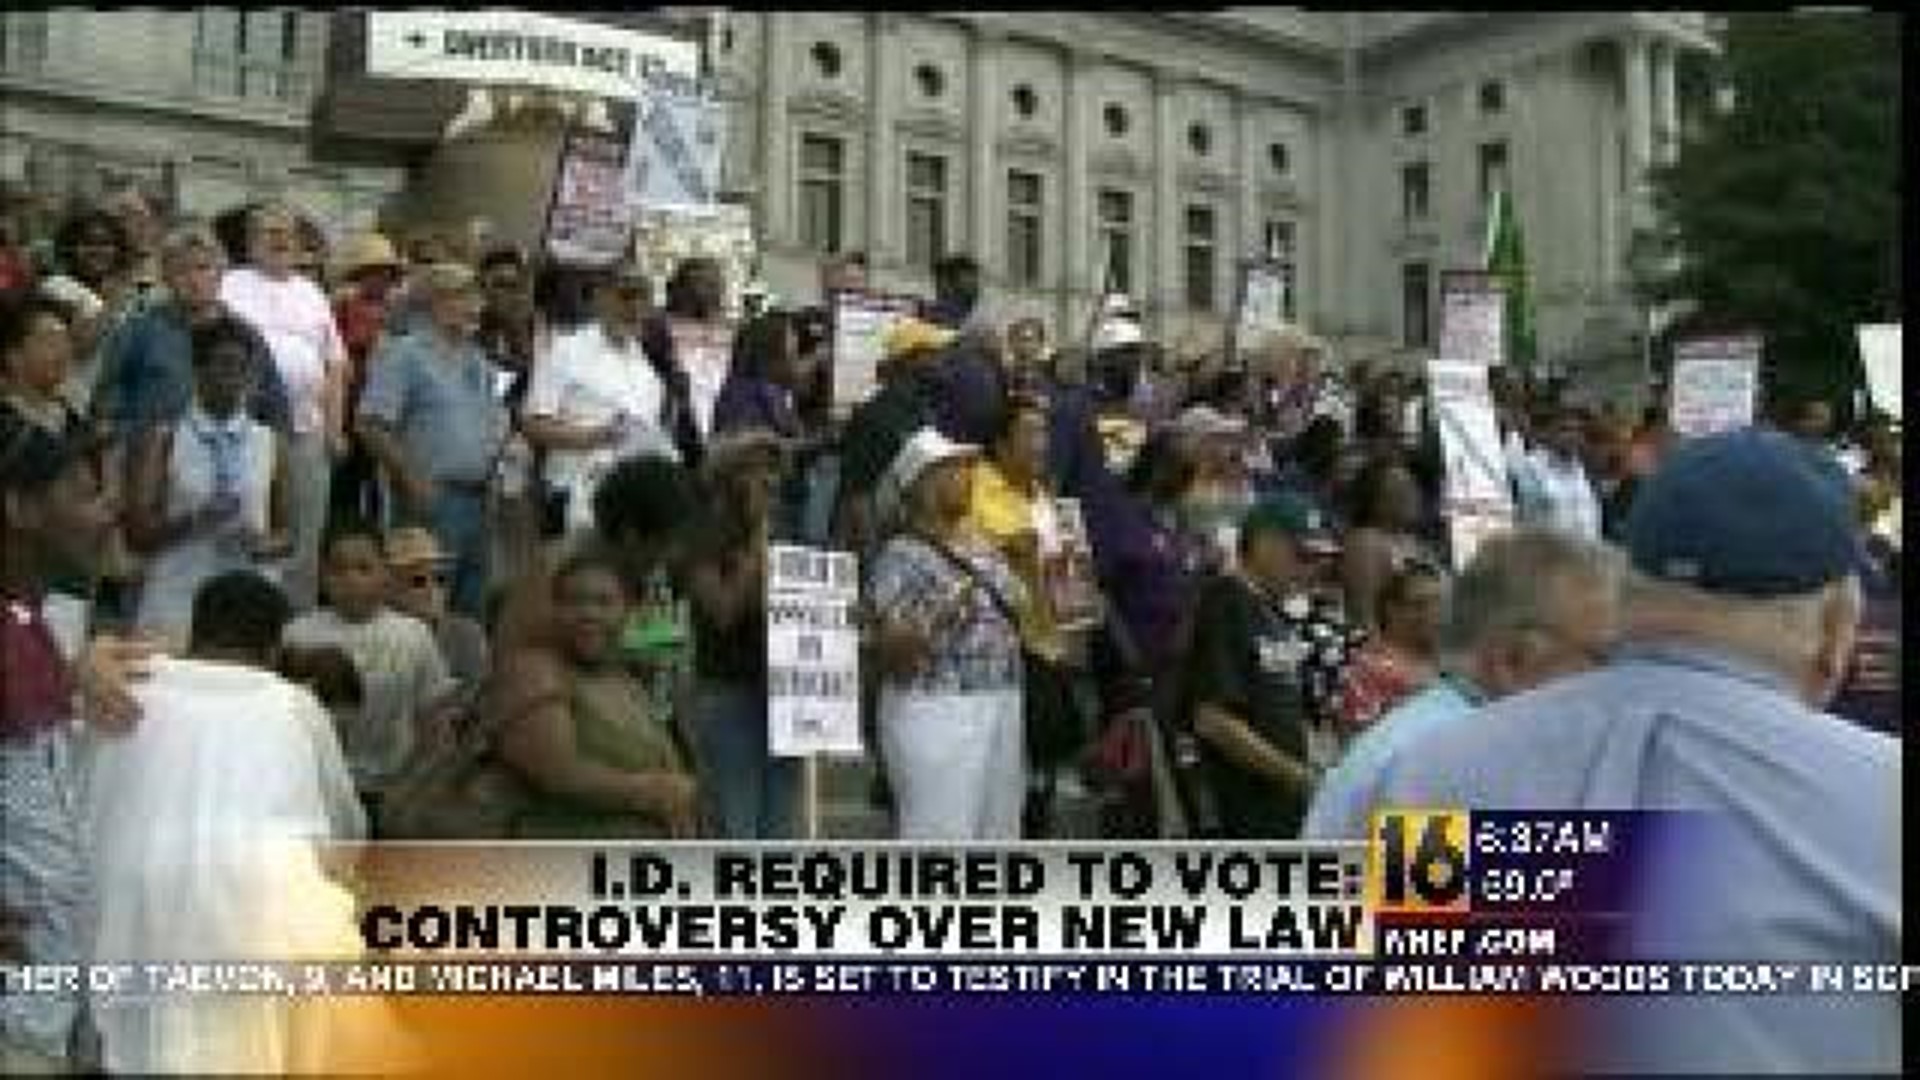 Voter I.D. Law: Controversy Continues